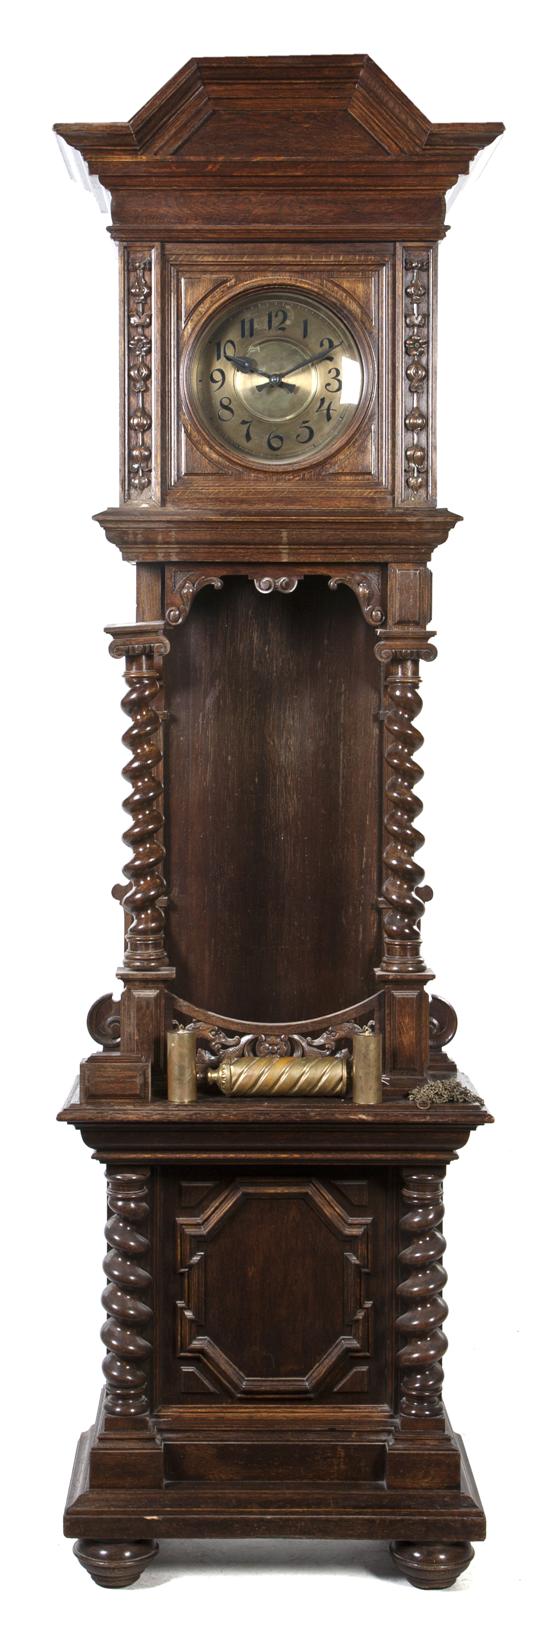 A Jacobean Style Carved Oak Tall